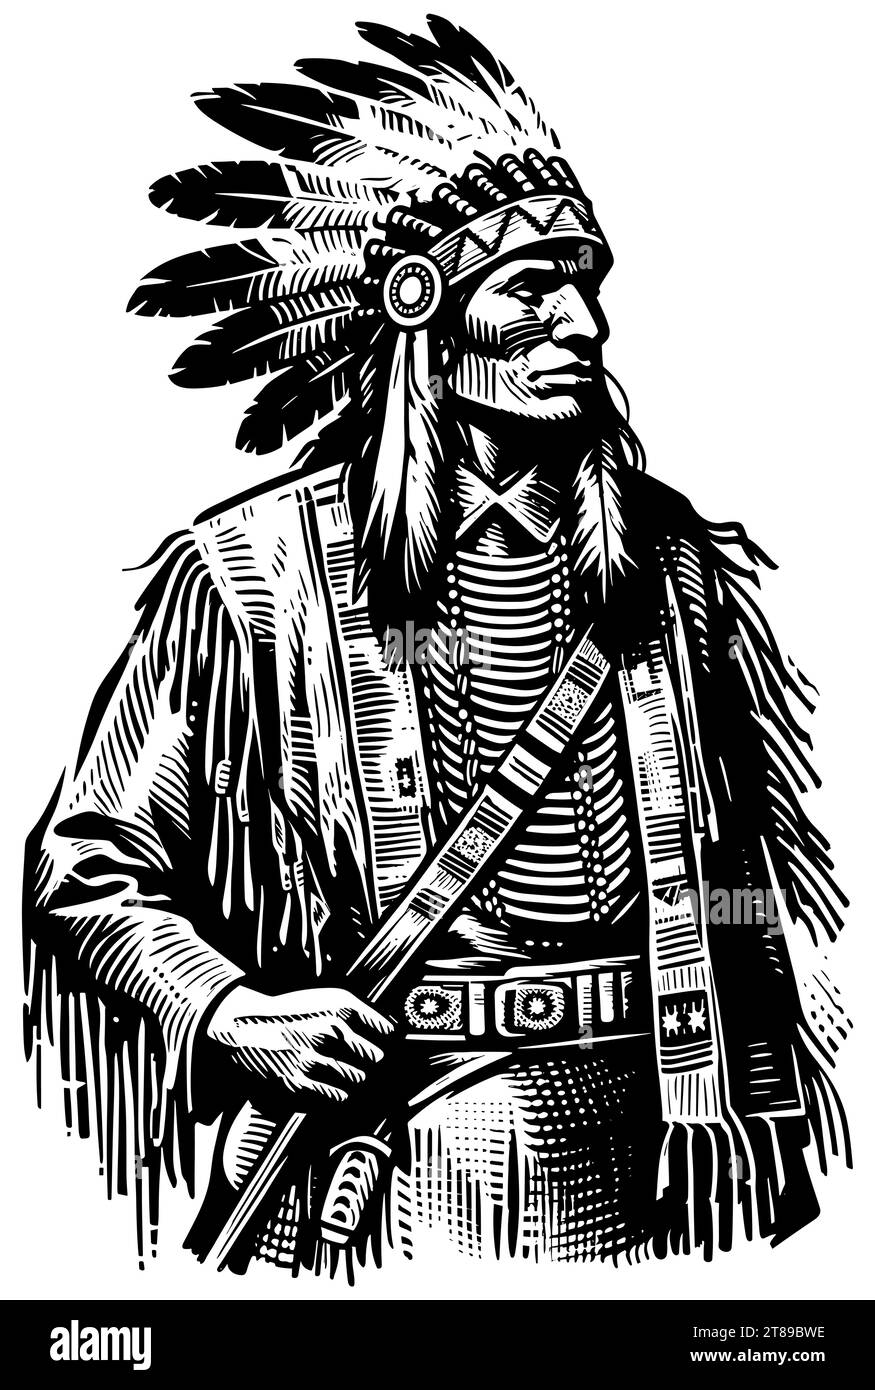 Linocut style illustration of Native American chief in traditional attire with feathered headdress. Stock Vector